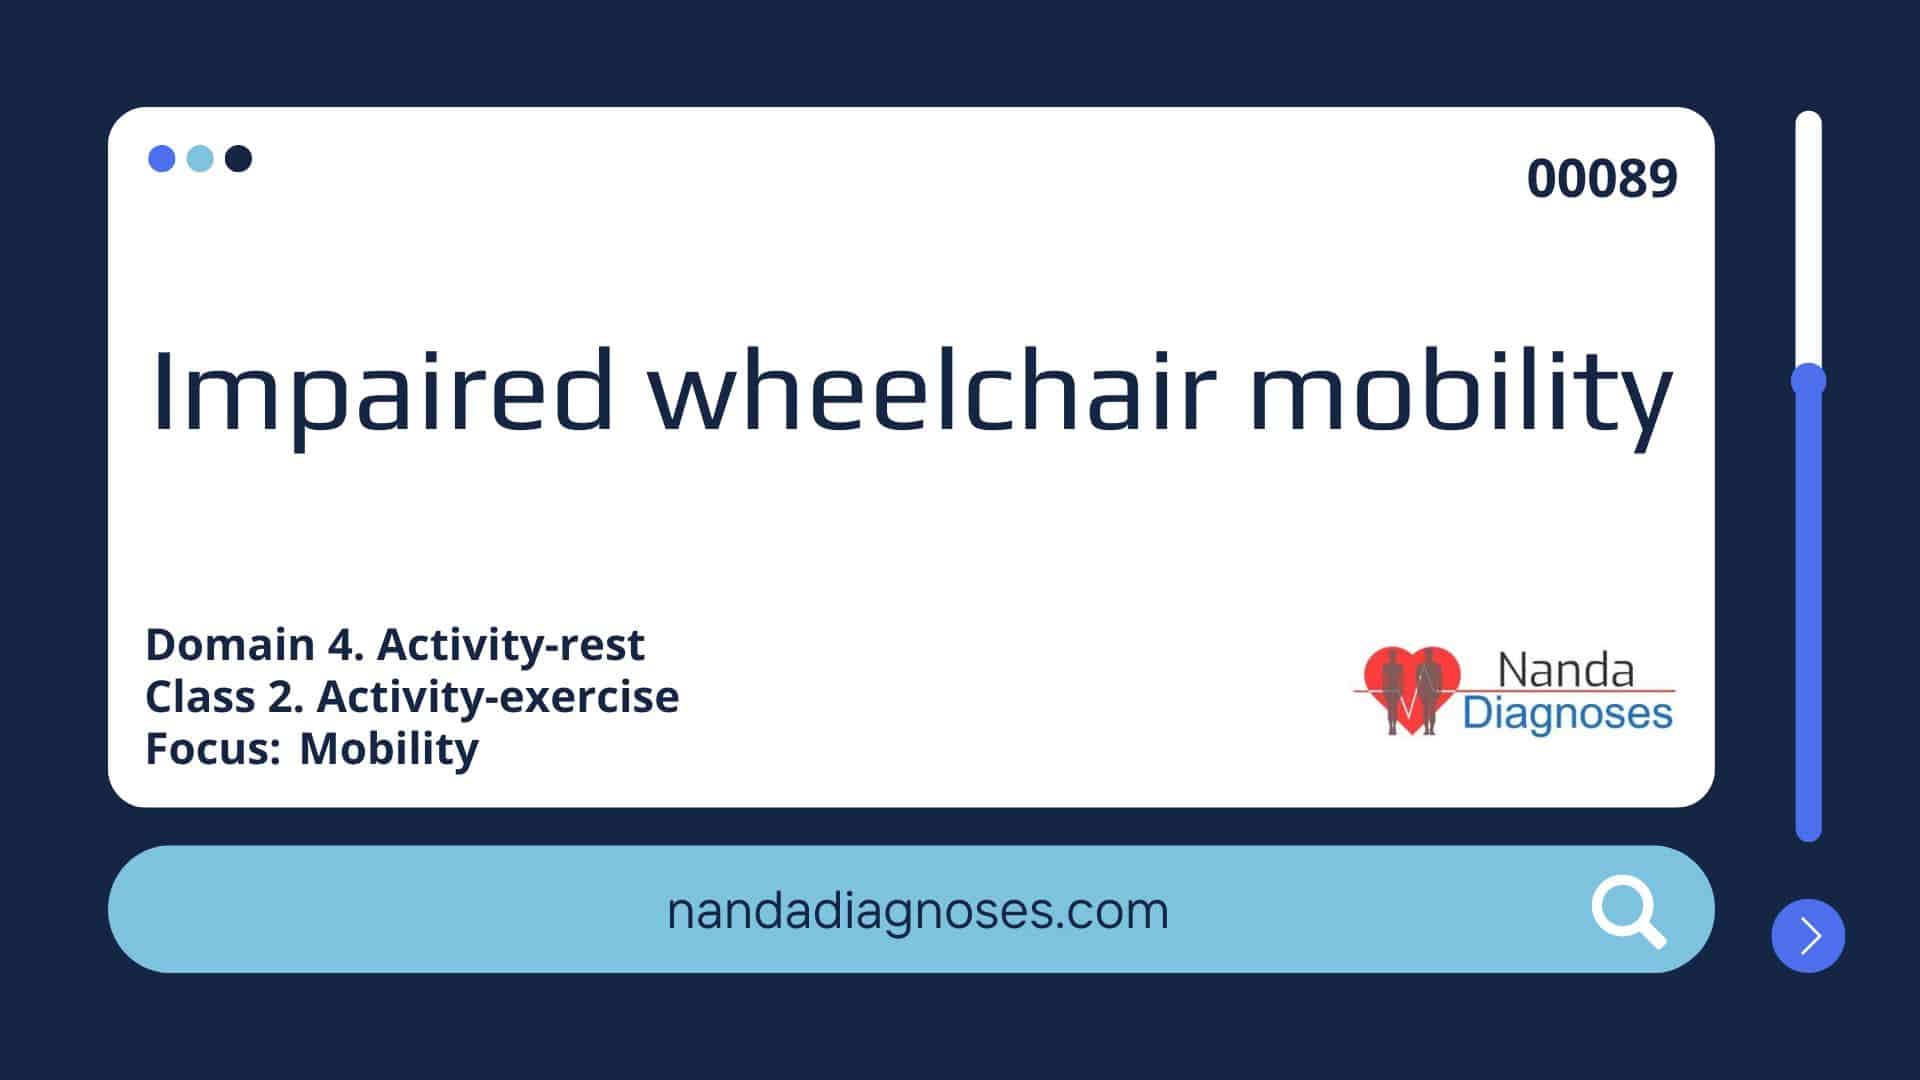 Impaired wheelchair mobility